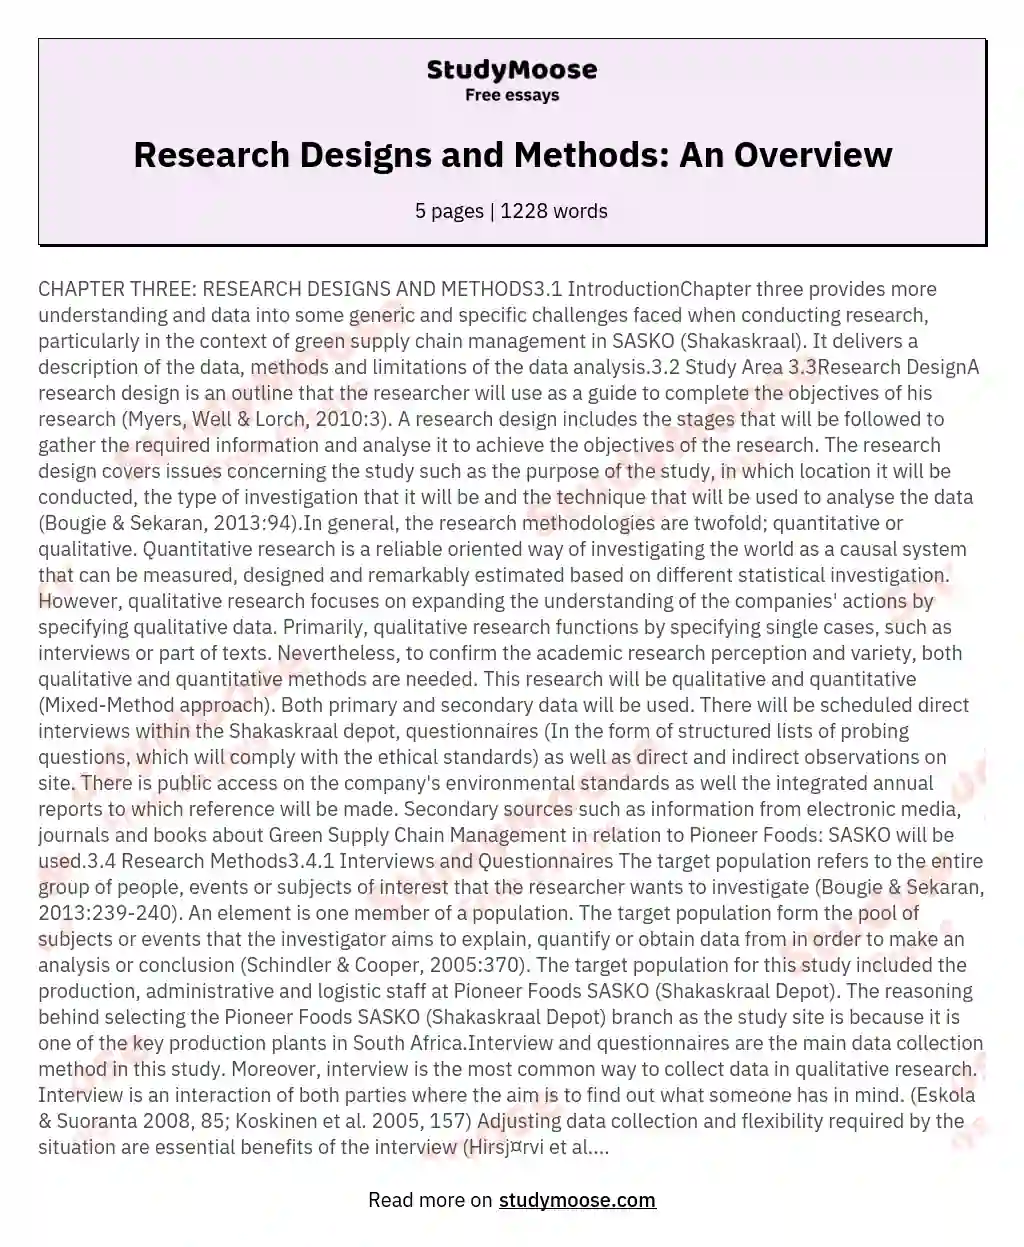 CHAPTER THREE RESEARCH DESIGNS AND METHODS31 IntroductionChapter three provides more understanding and